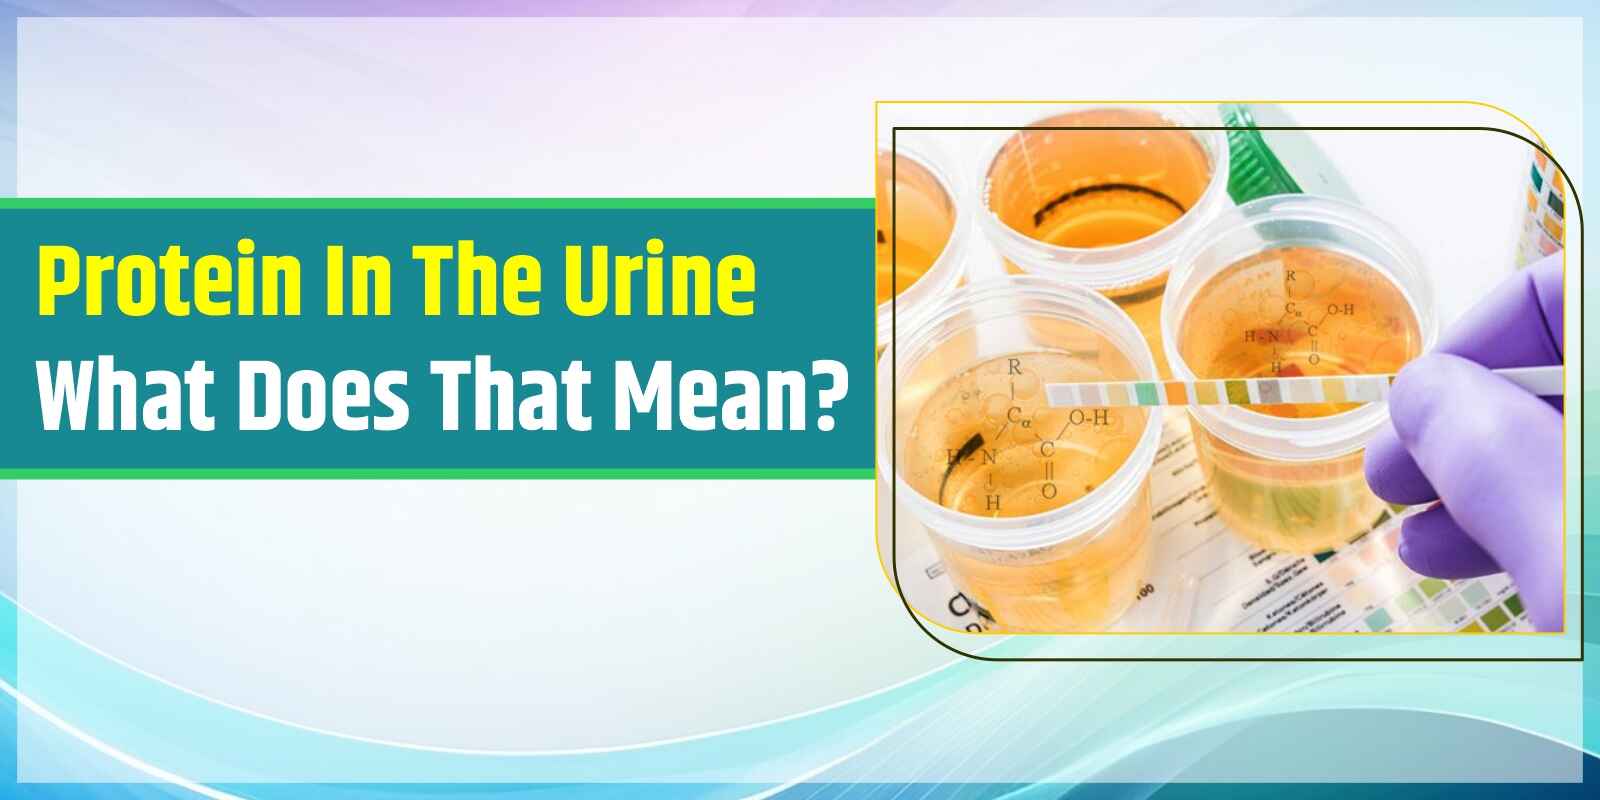 Protein In The Urine What Does That Mean?